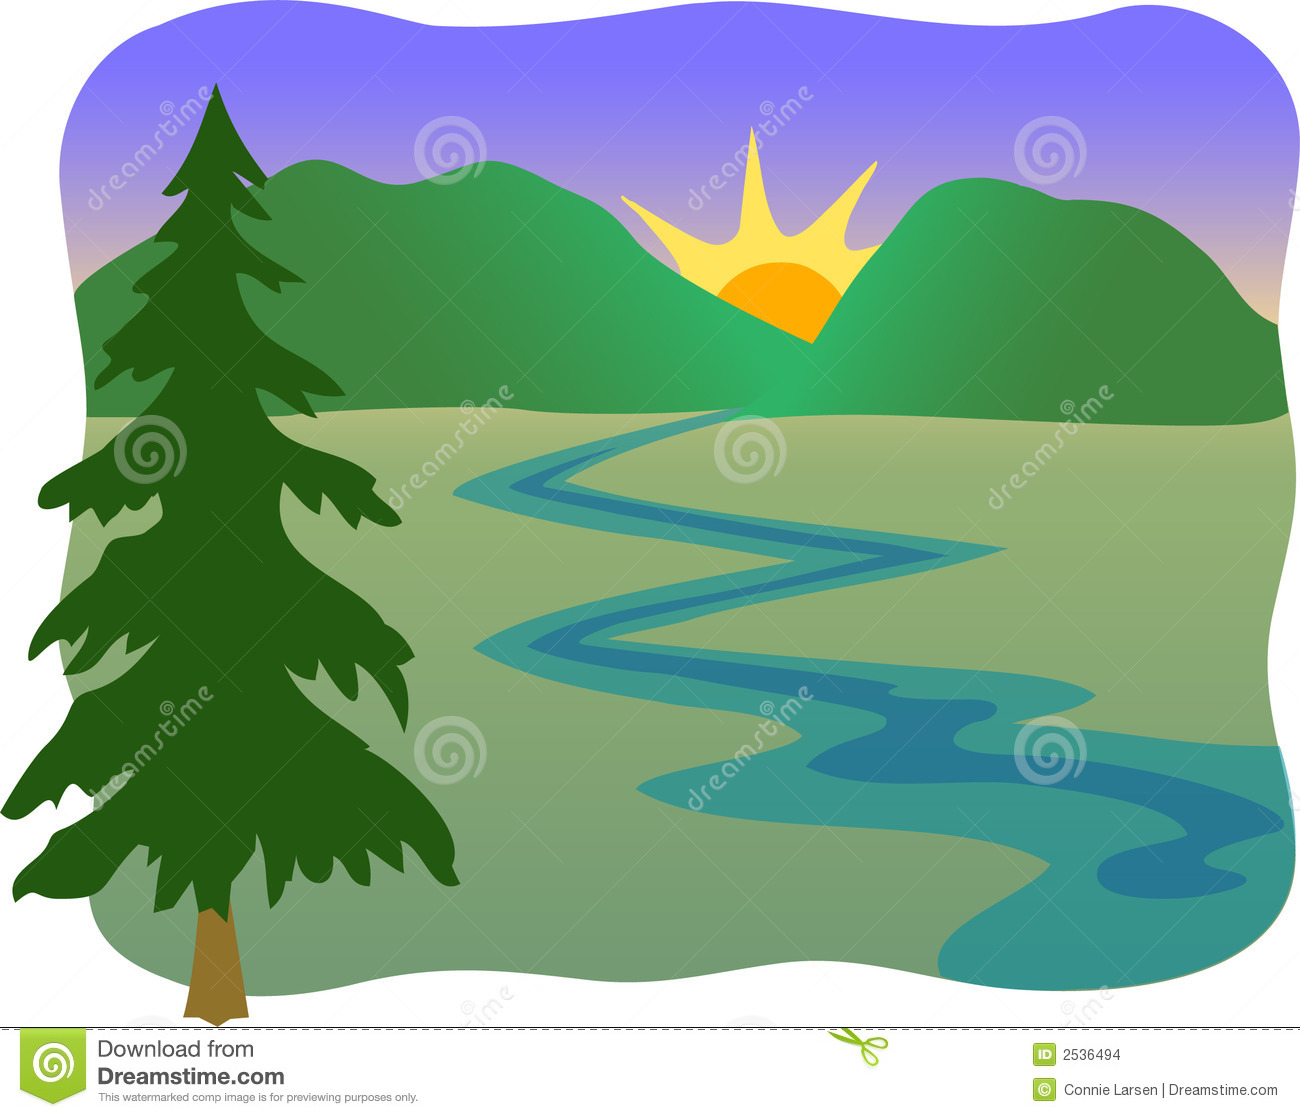 Illustration Of A Mountain Stream Sunrise Or Sunset With A Pine Tree